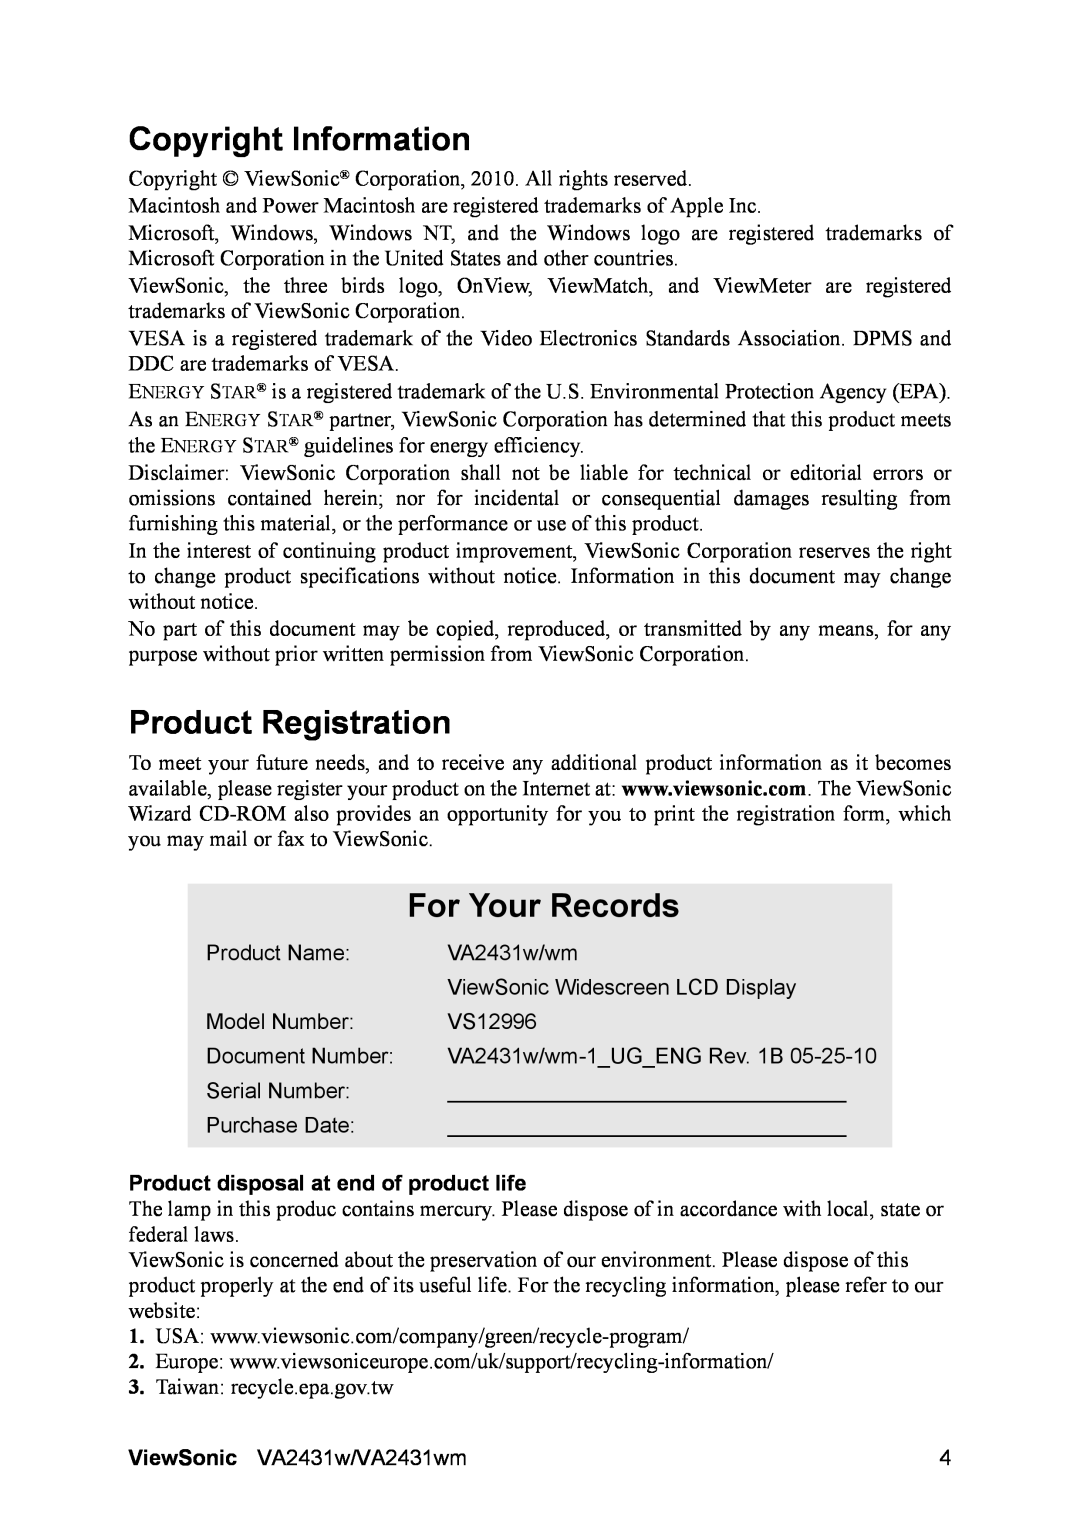 ViewSonic VA2431W Copyright Information, Product Registration, For Your Records, Product disposal at end of product life 